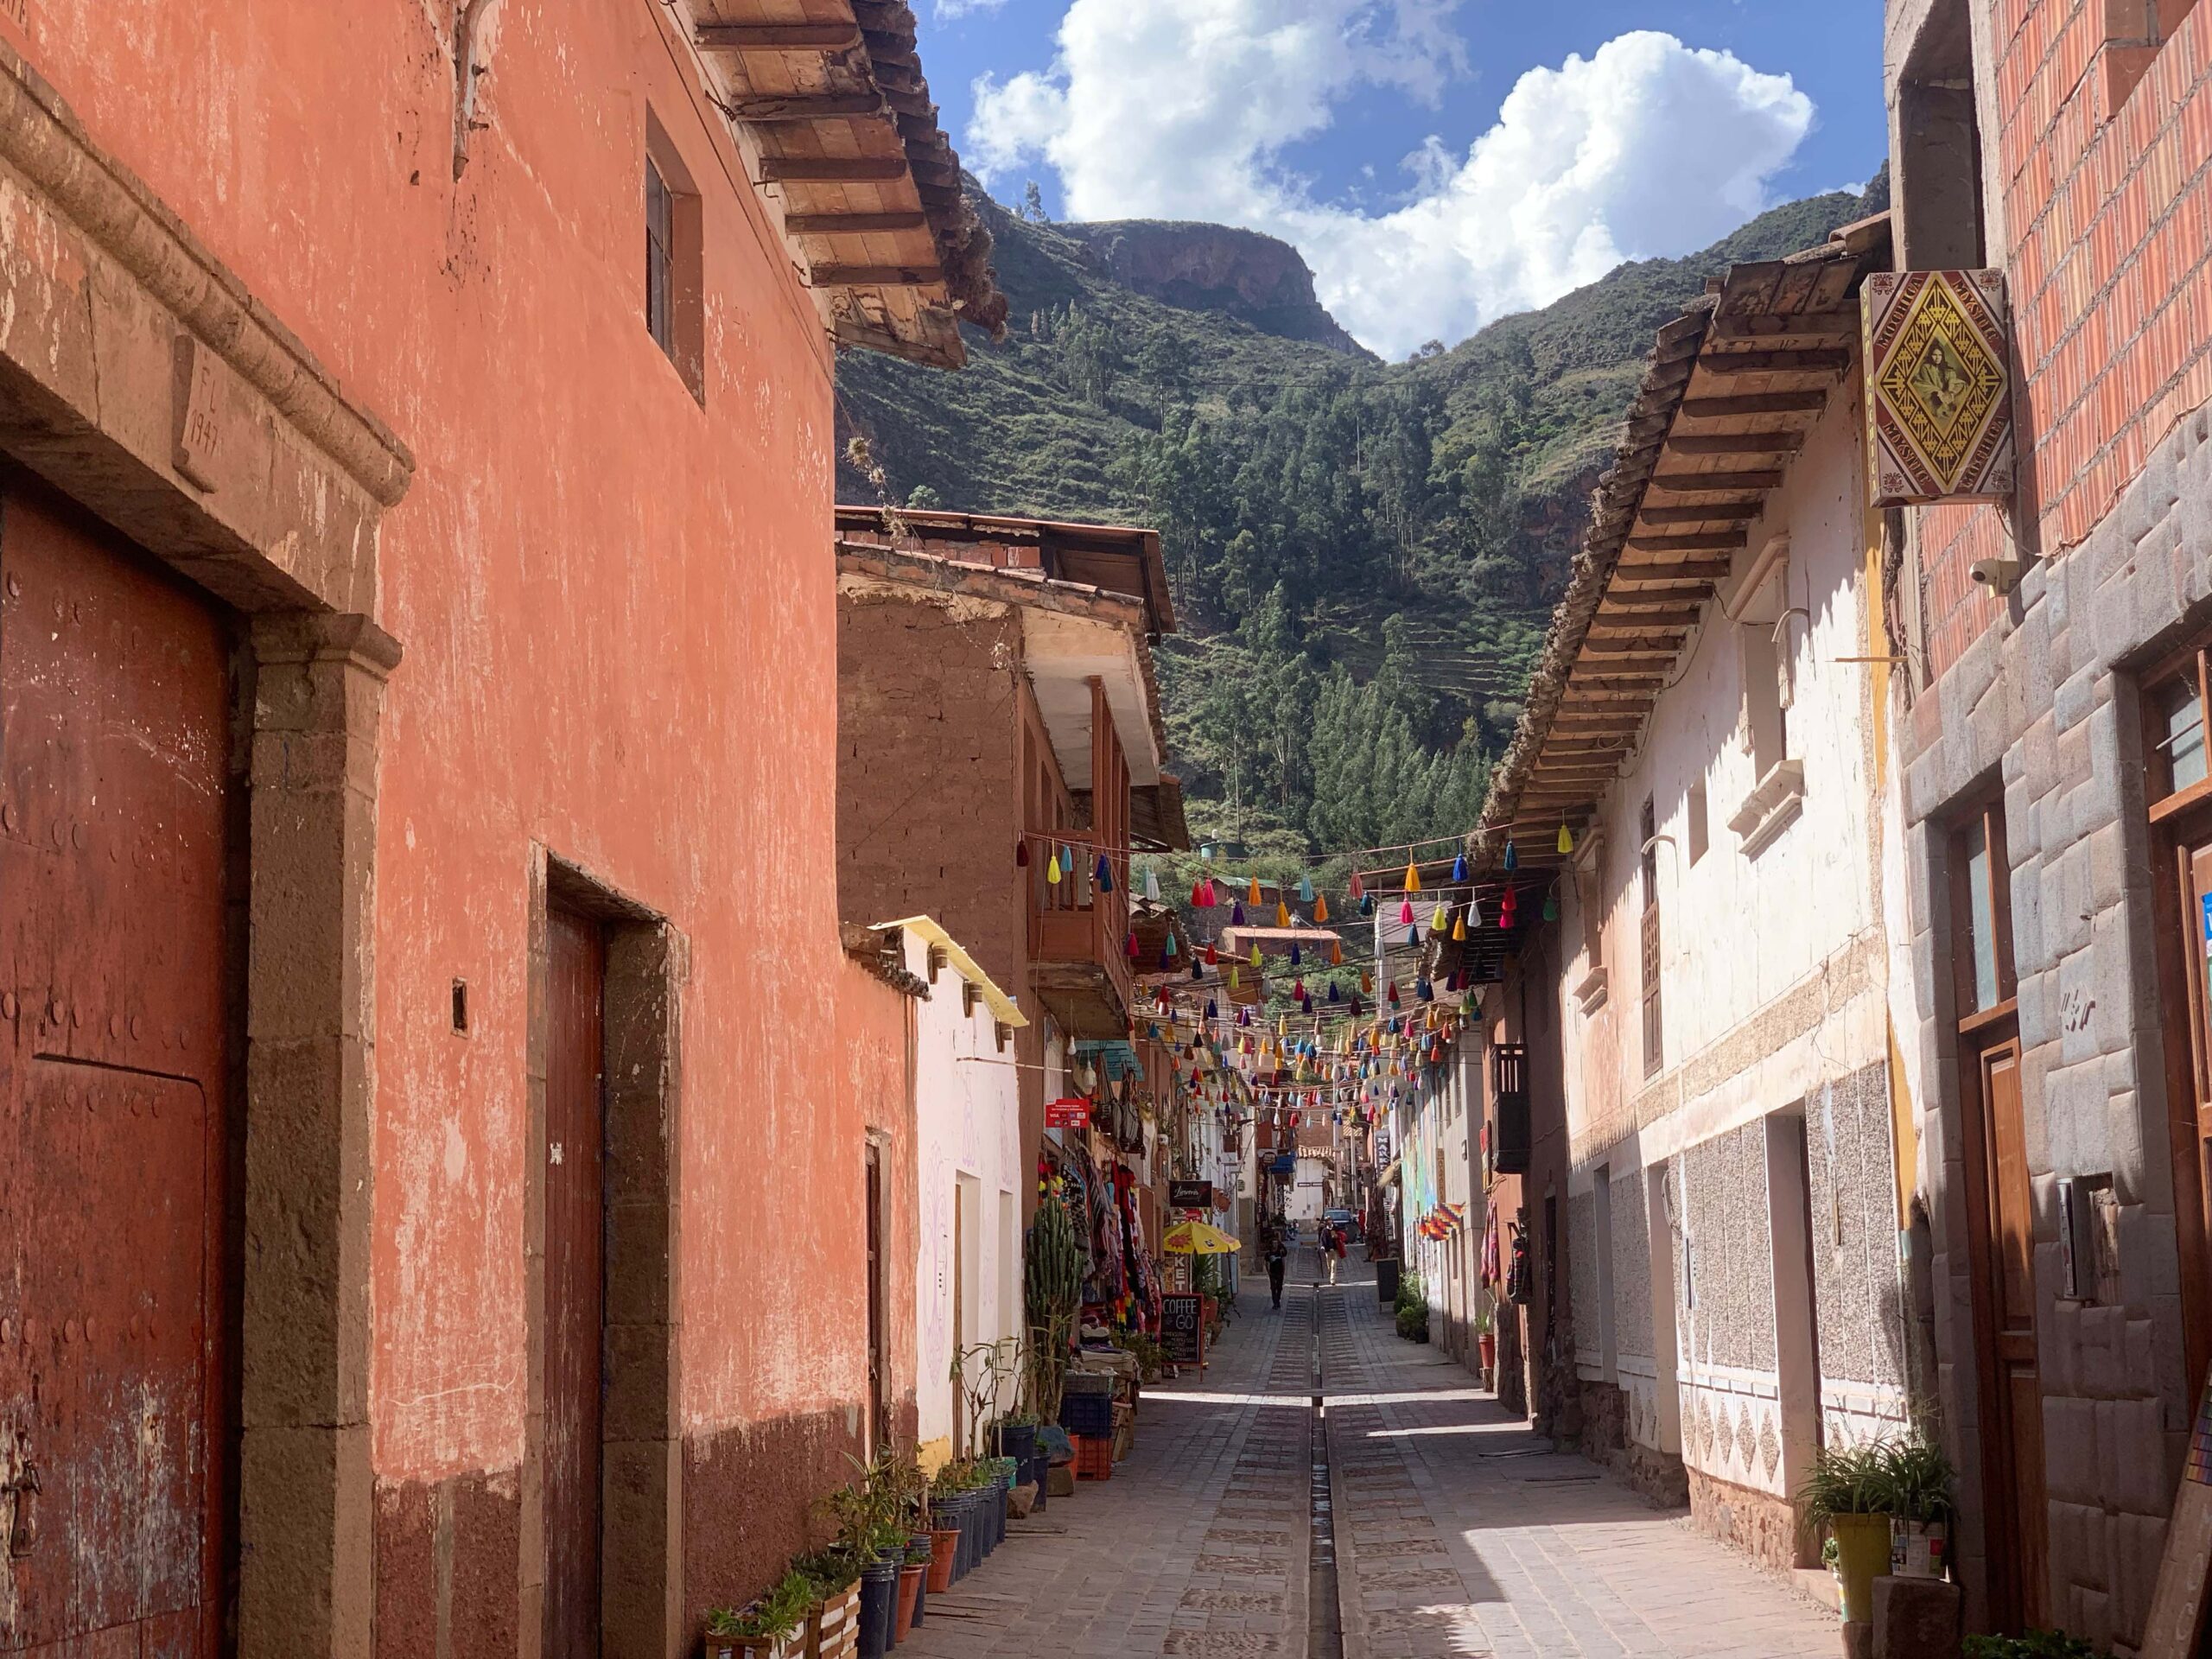 Israelis flock to this tiny town in Peru for vacation — and psychedelic spirituality